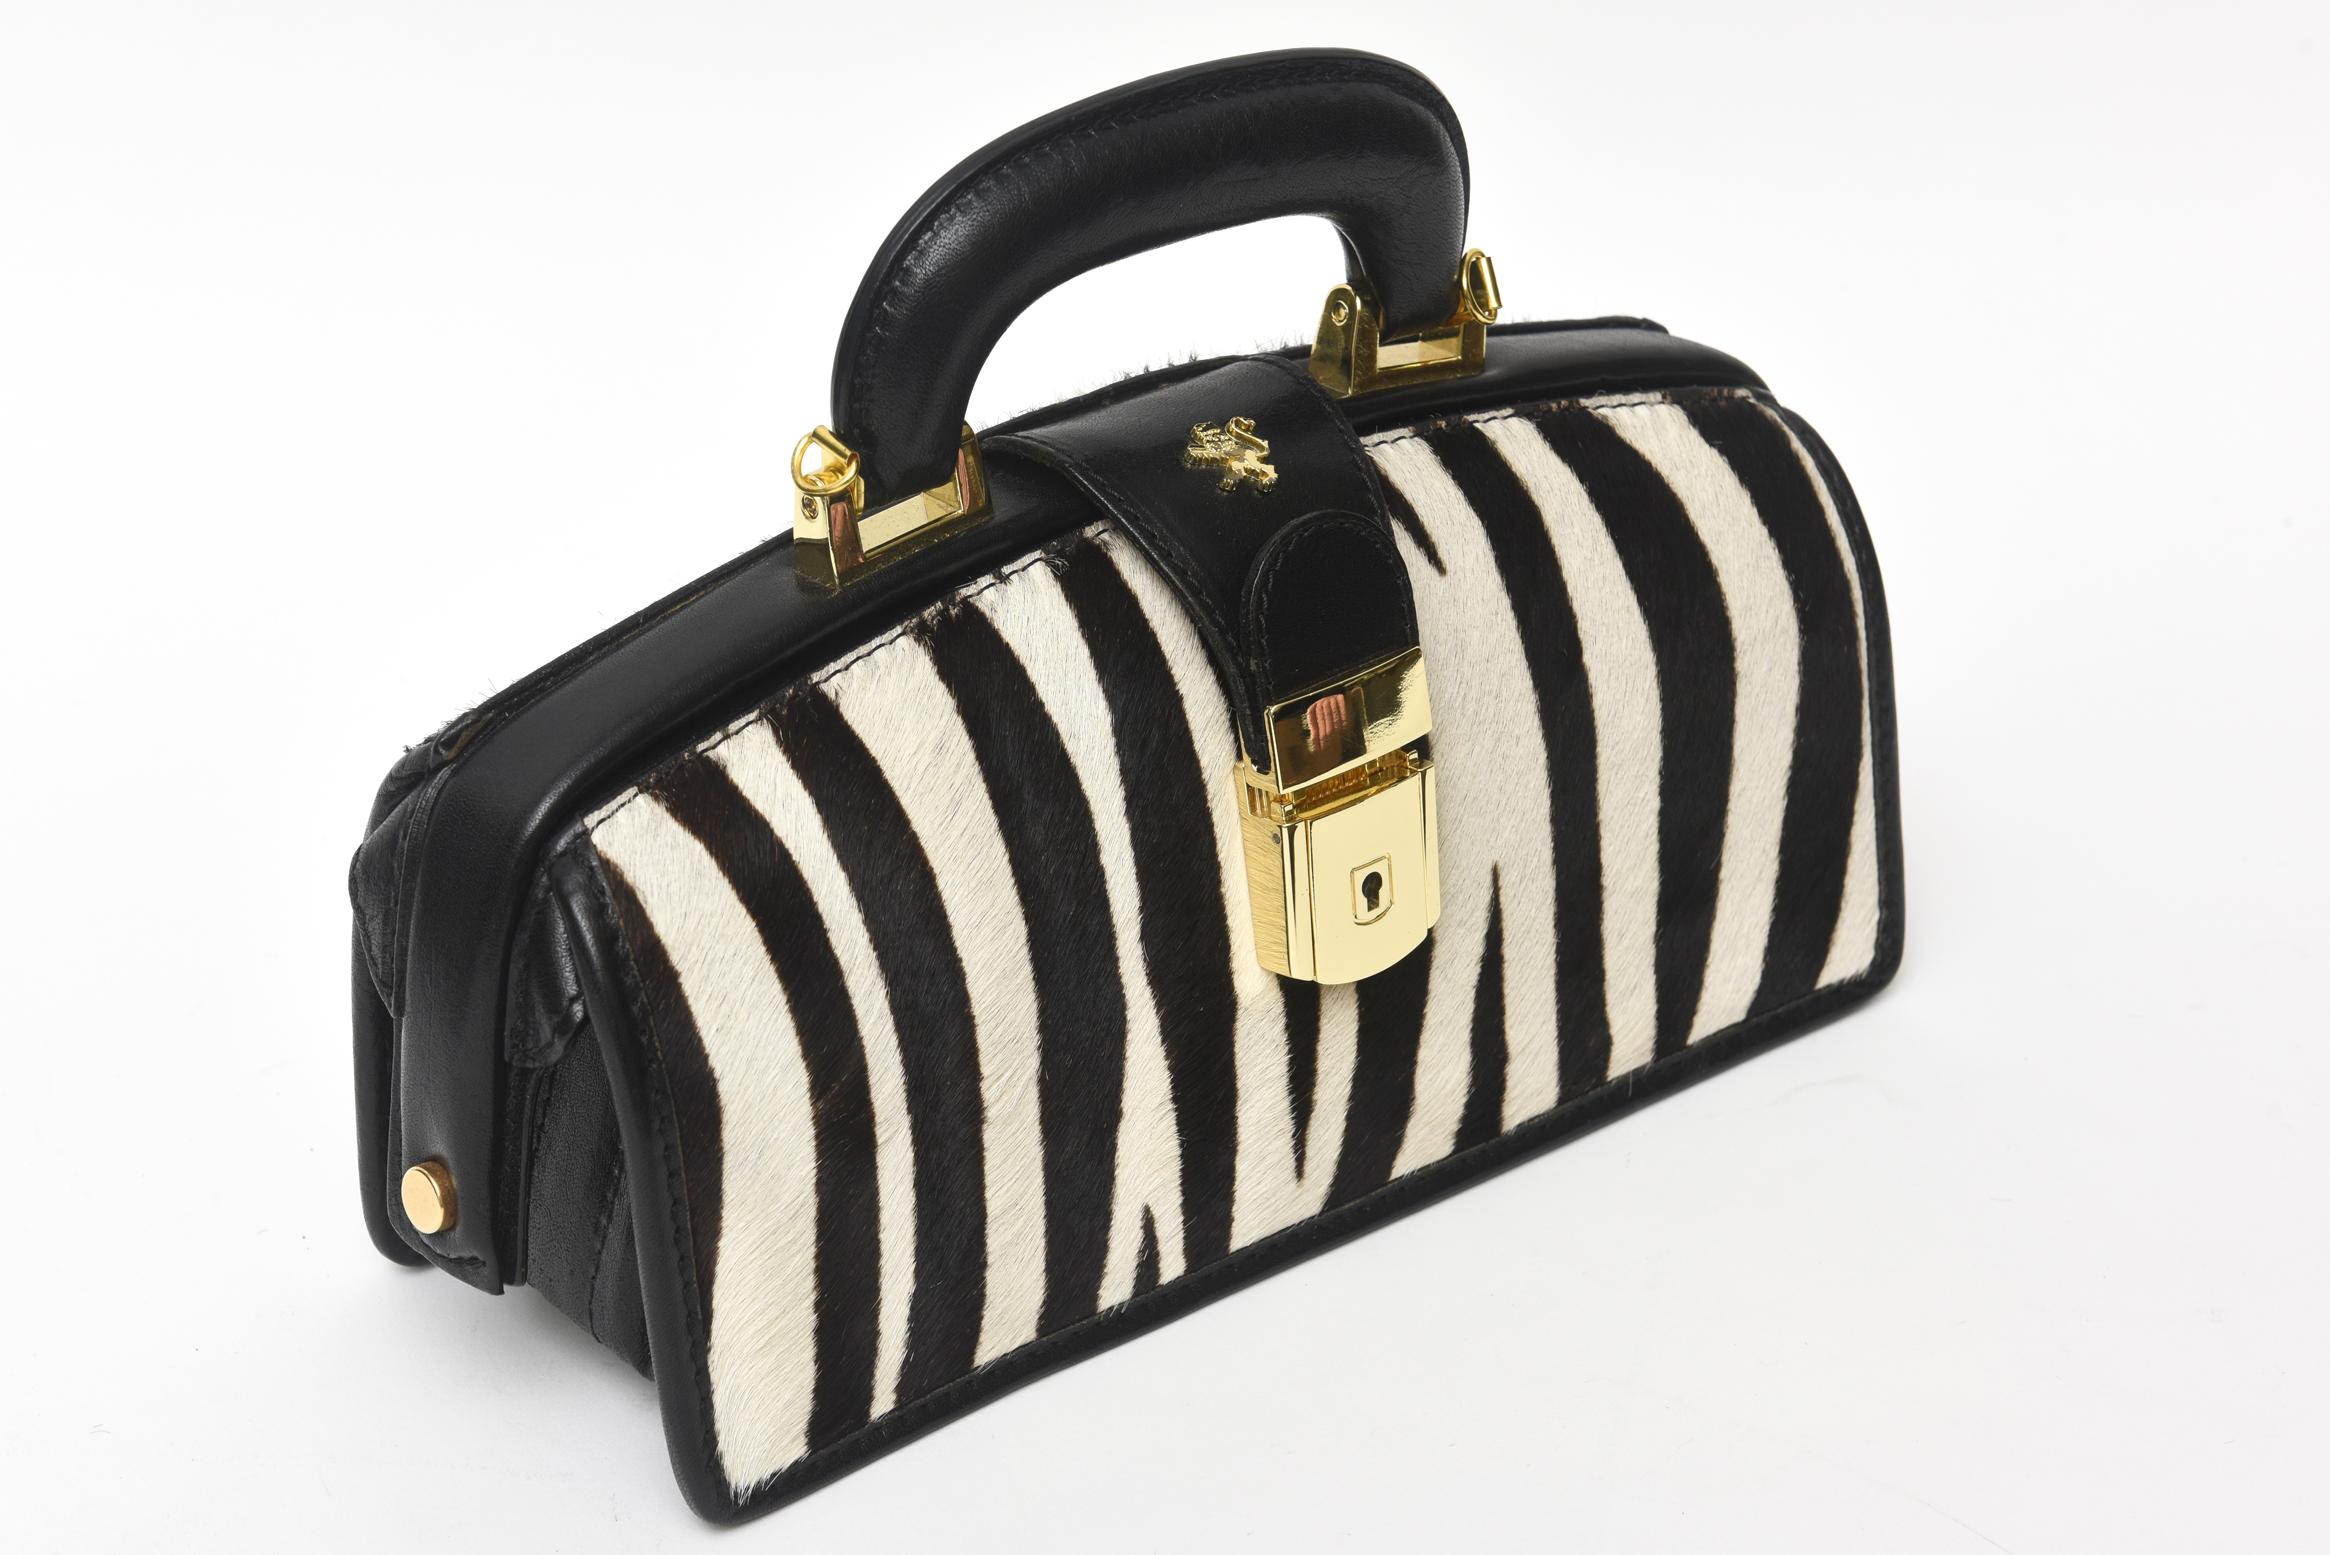 This gorgeous vintage Italian zebra pony hair mini doctor's bag handbag has gold plated hardware with a key and a special lock. The handle is black leather with a stunning gold leather interior. There is also a light inside to view the beautiful